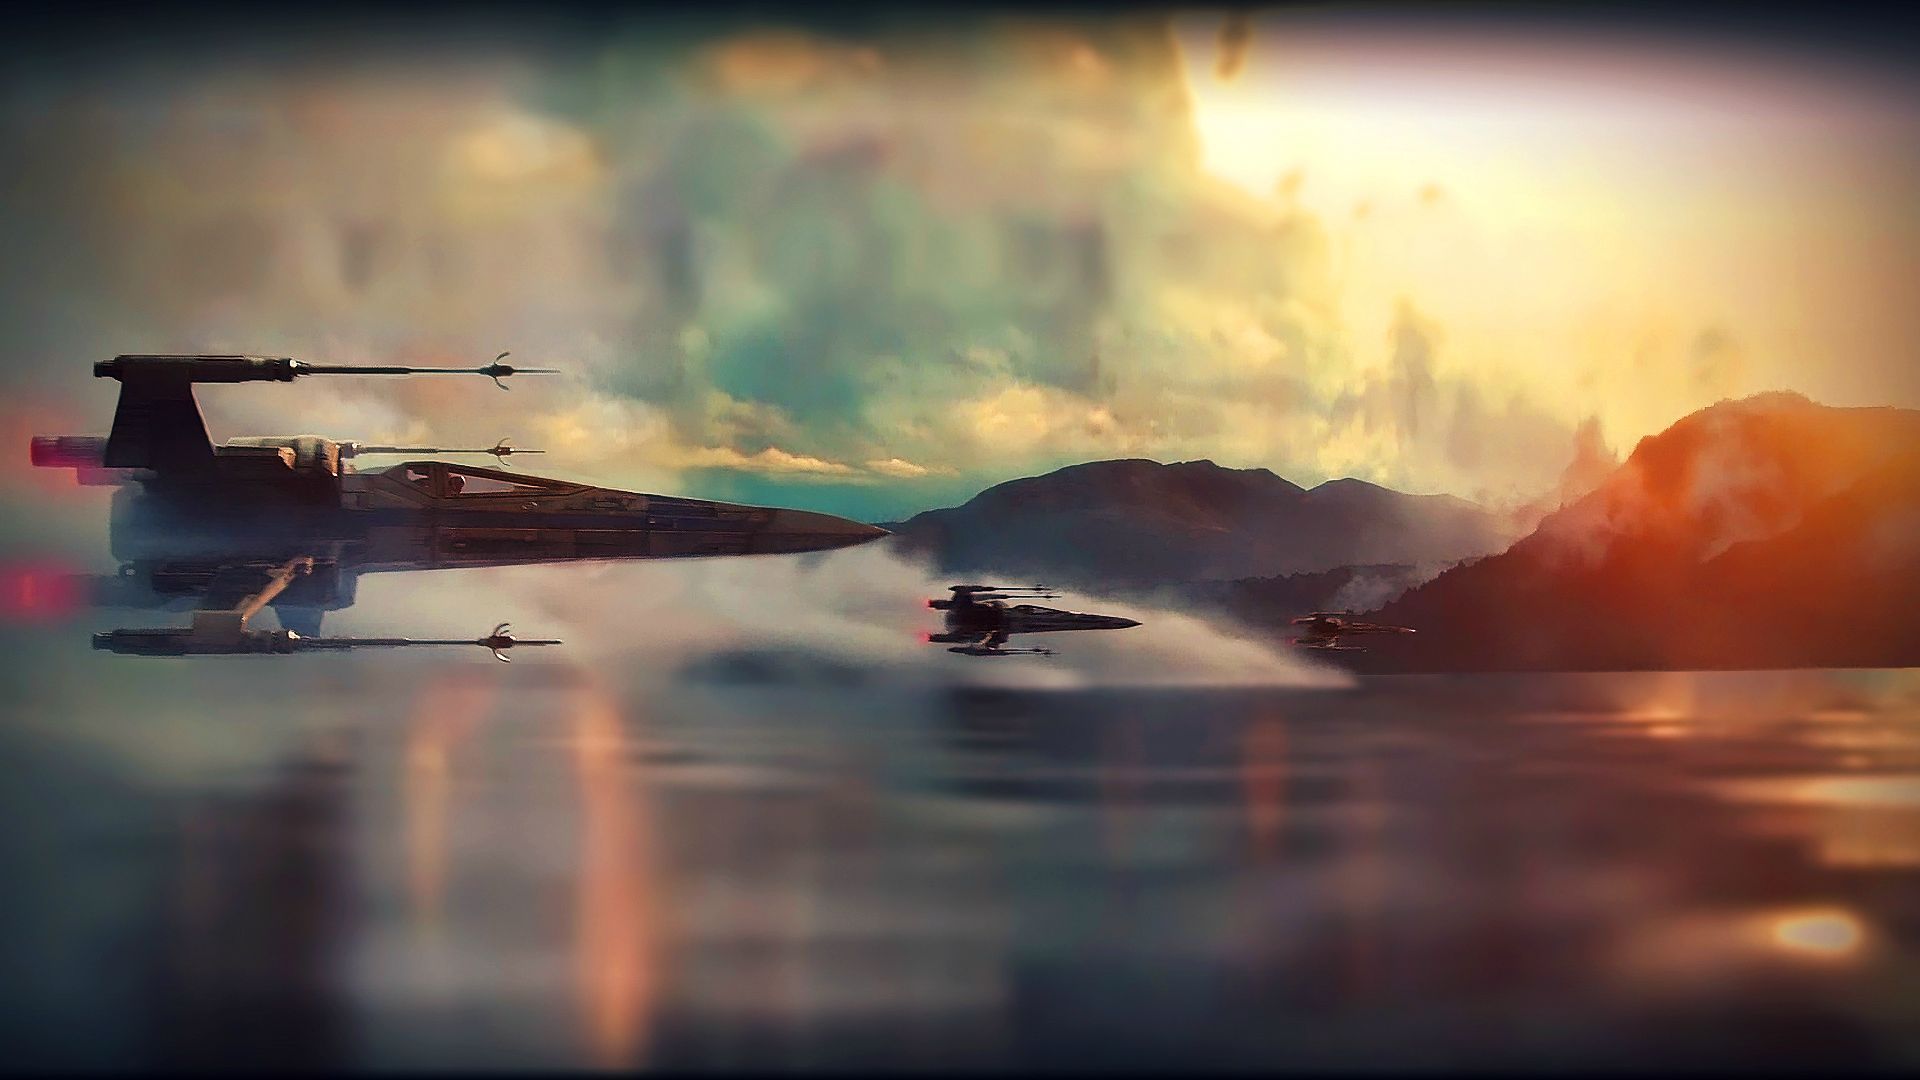 Star Wars: The Force Awakens Wallpapers